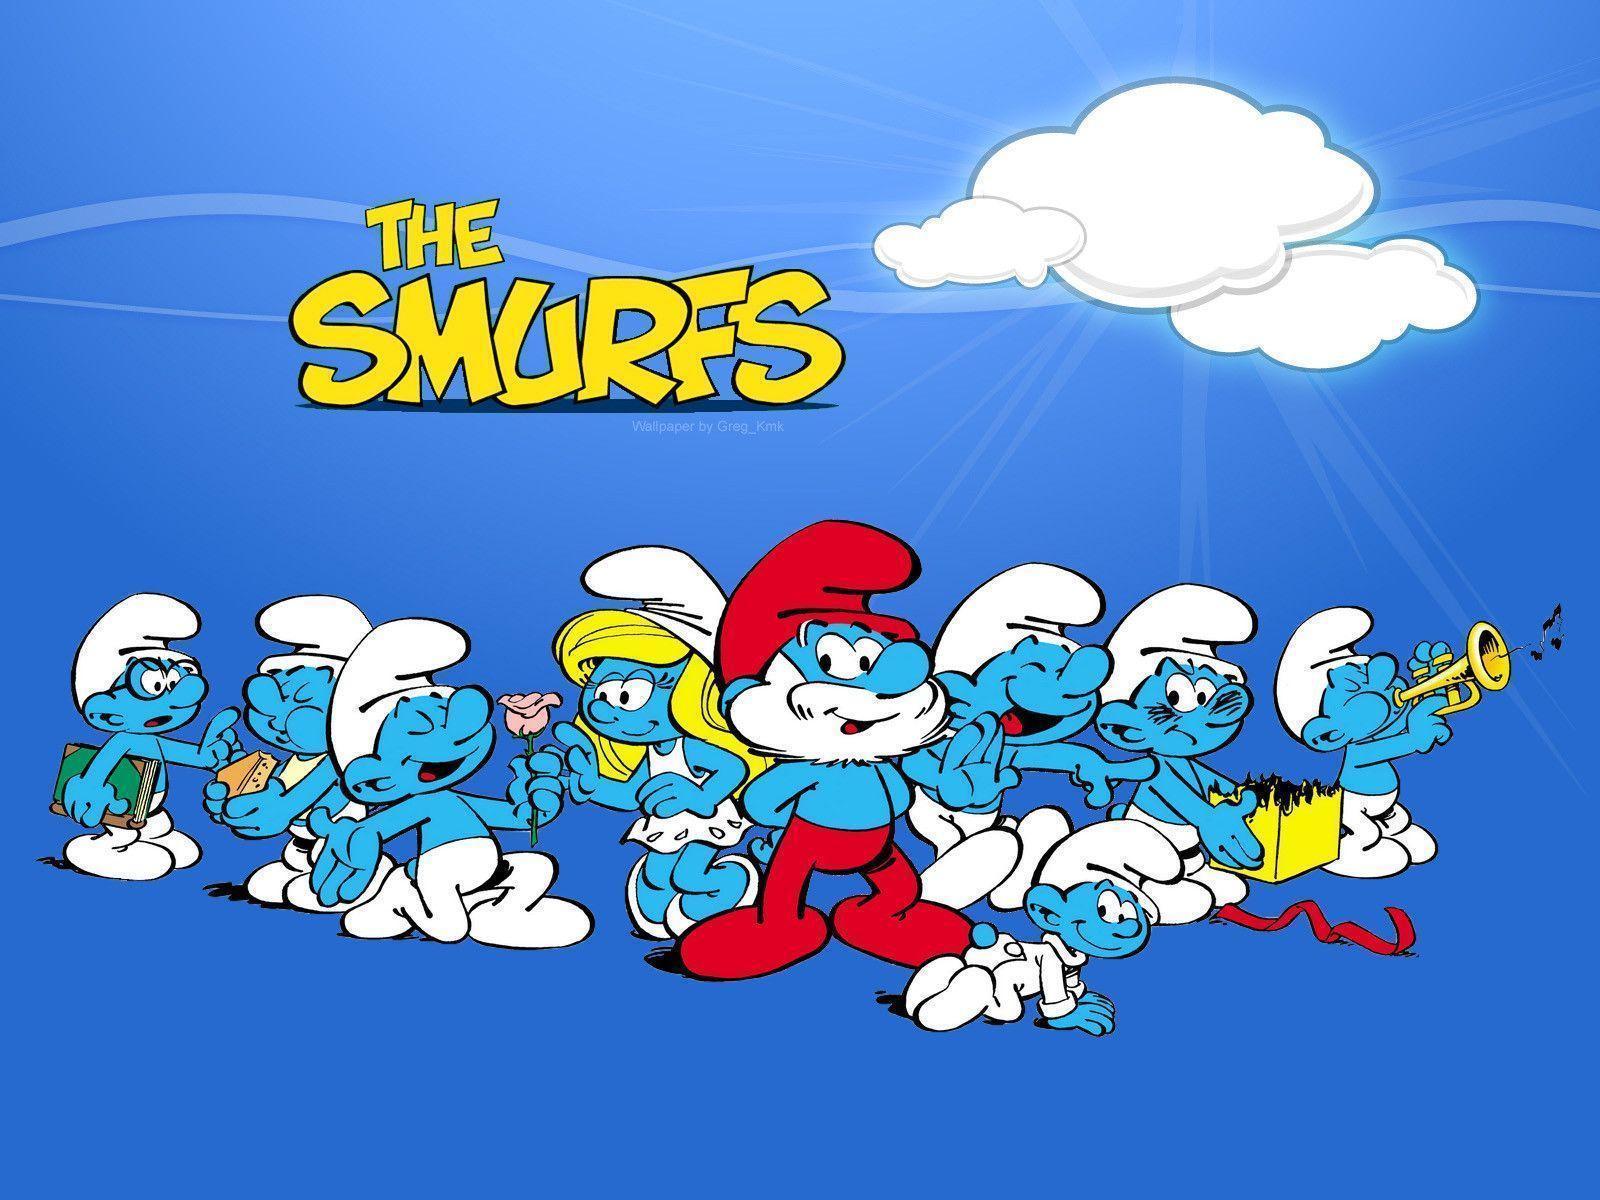 Drawn Heroes. The Smurfs Wallpaper